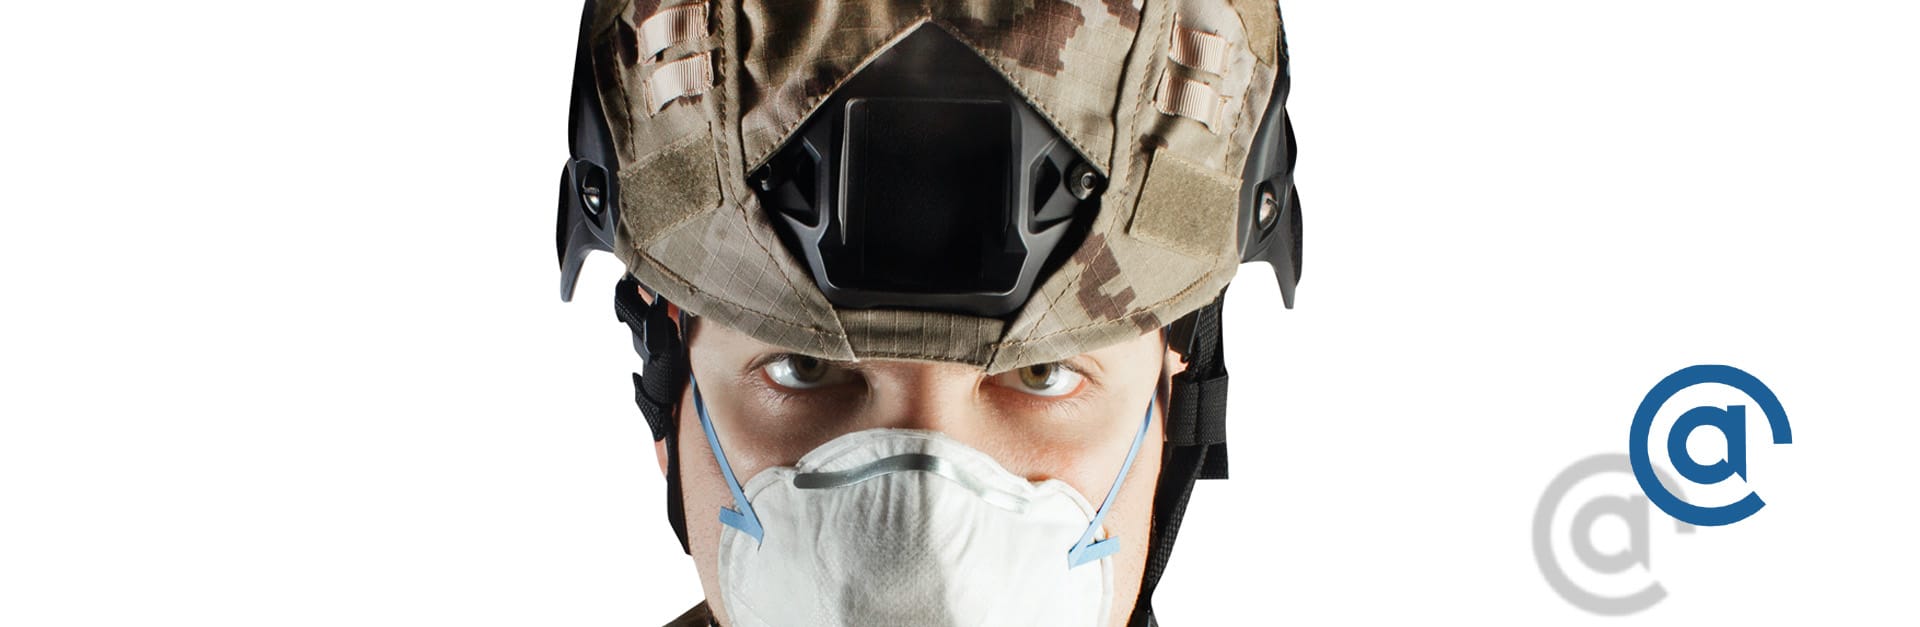 Soldier with helmet, also wearing a medical mask